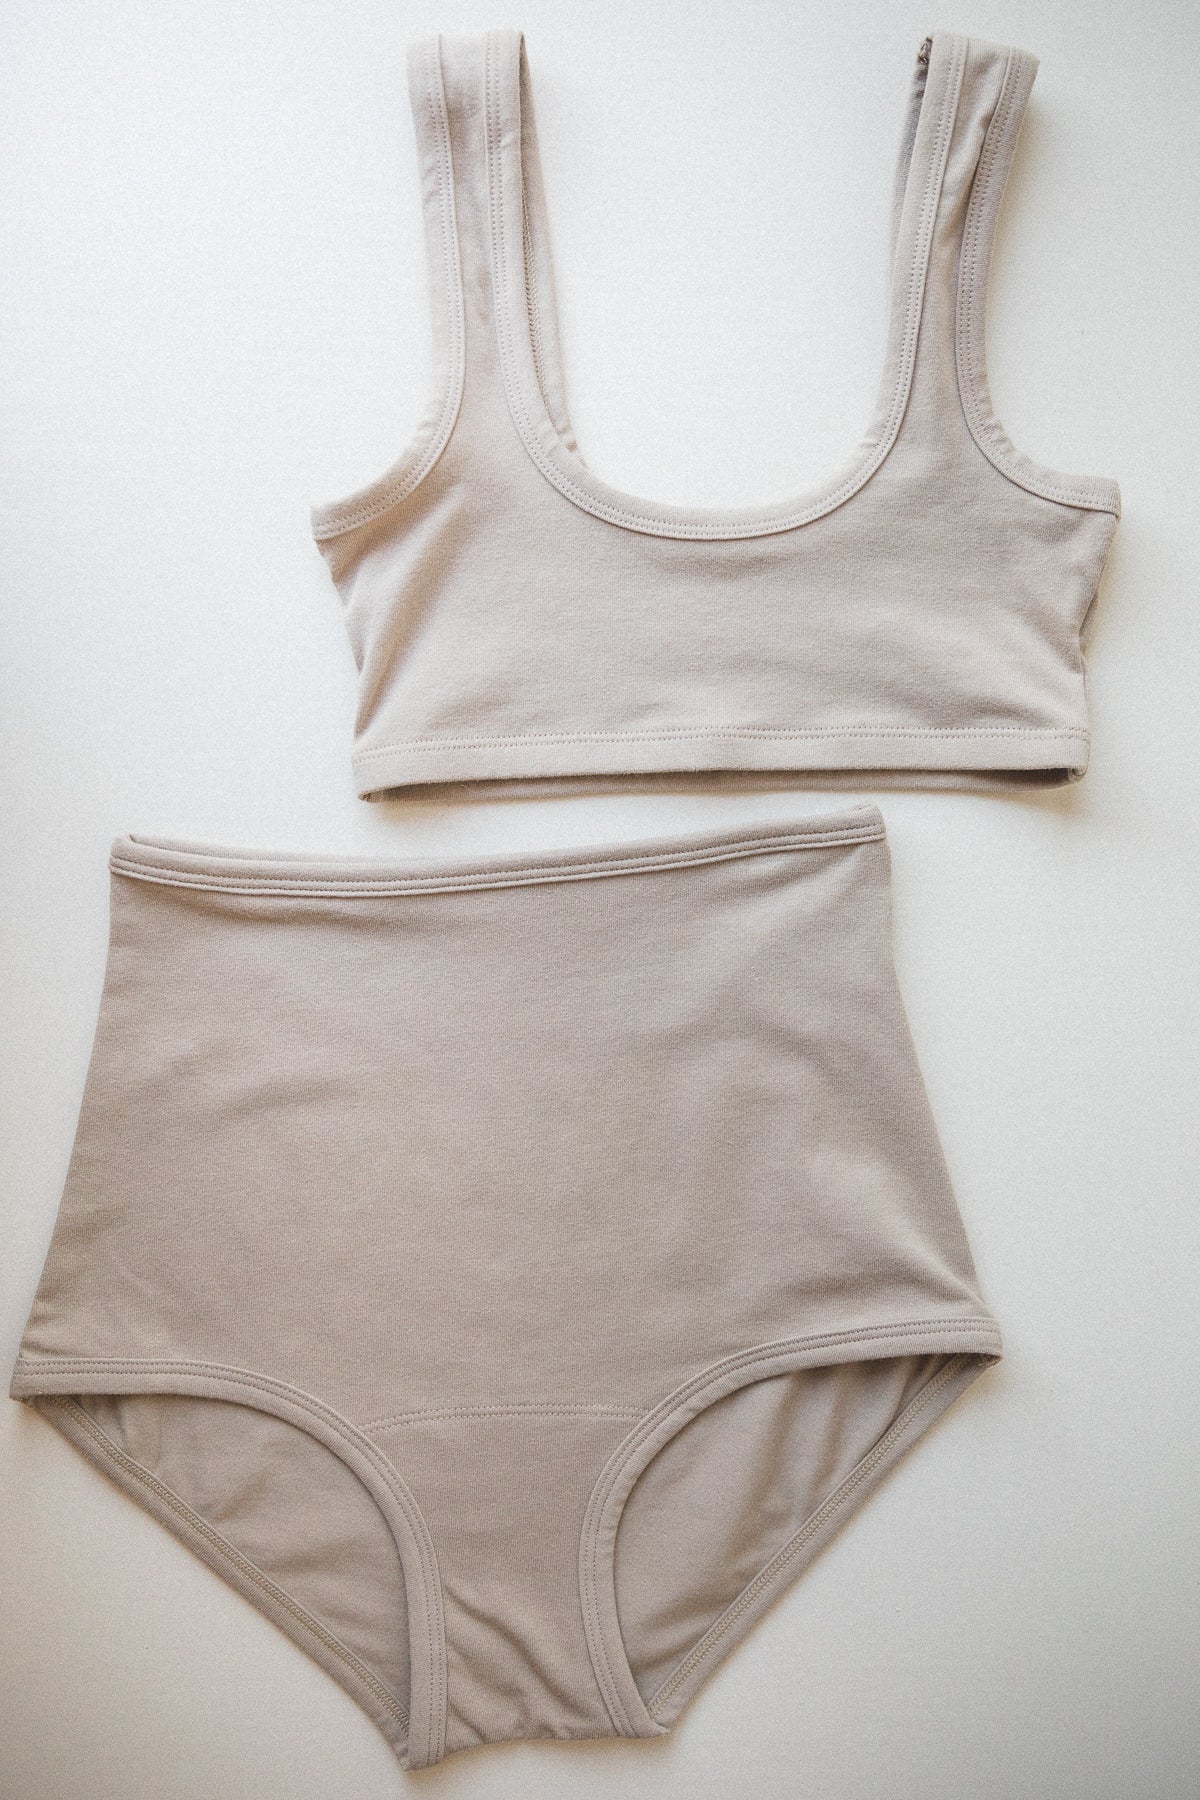 Taupe Bra - Buy Taupe Bra online in India